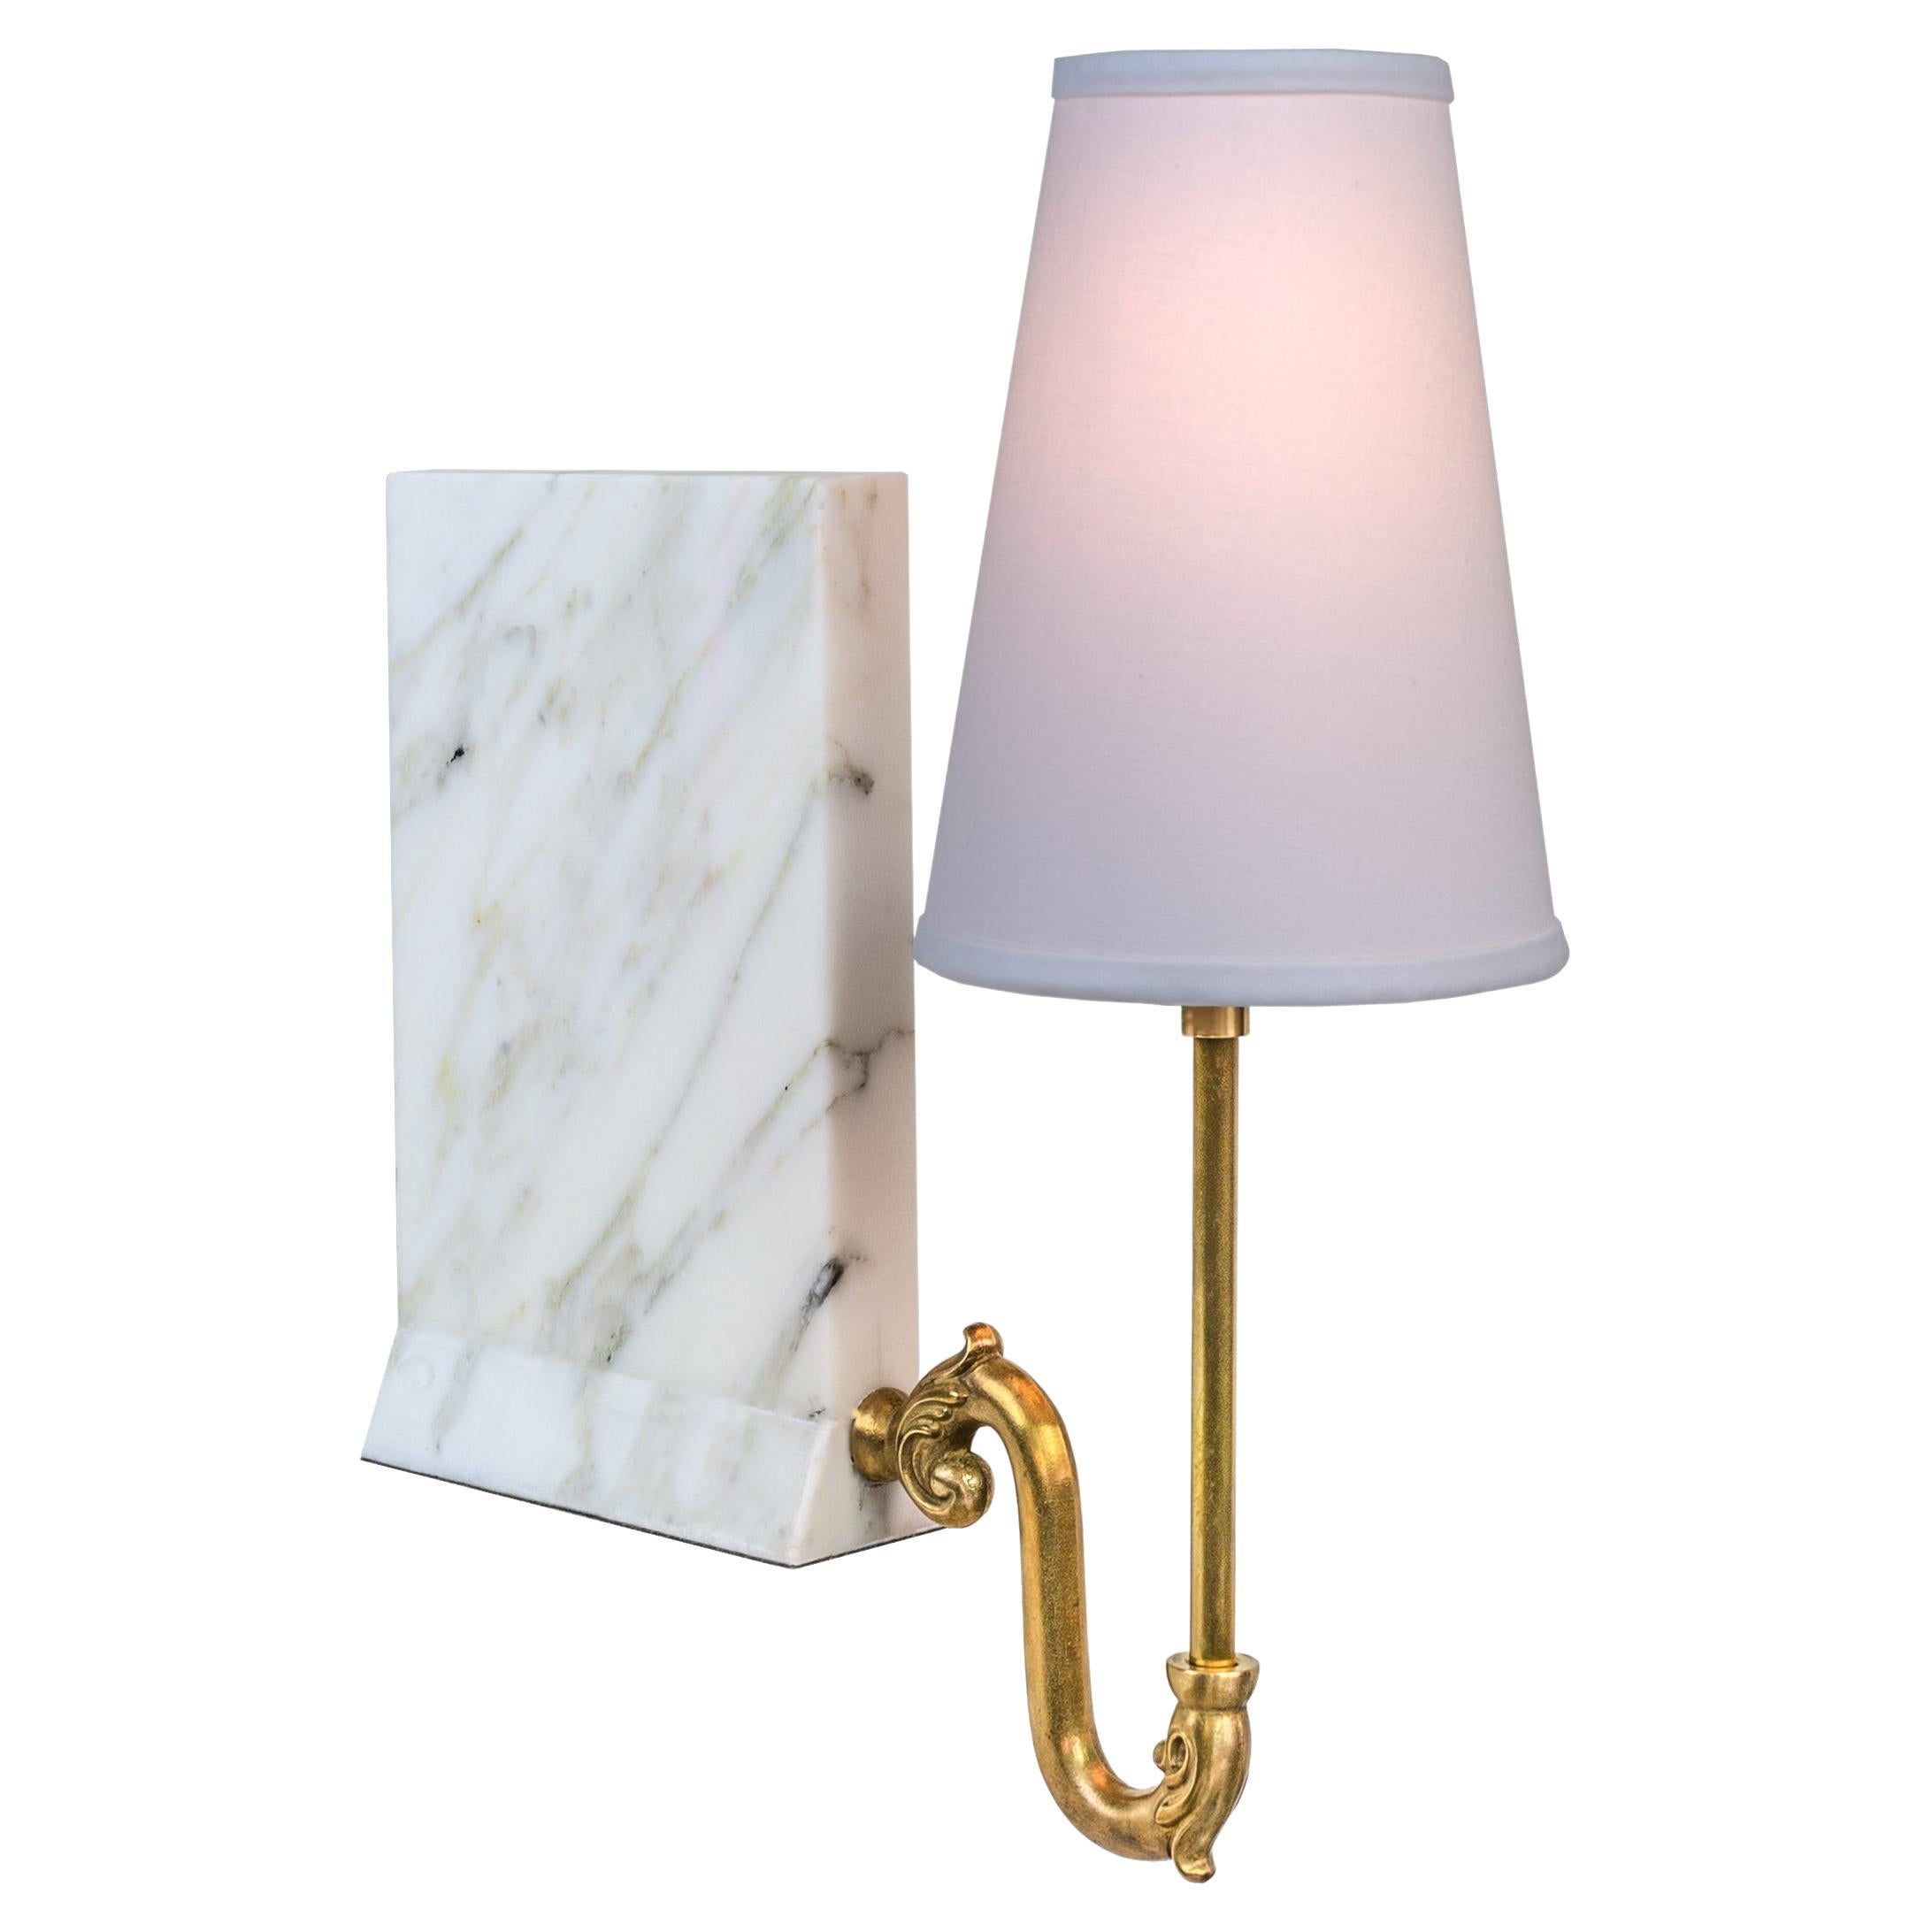 Library Sconce, Contemporary Bookshelf Sconce in Carrara Marble, Aged Brass